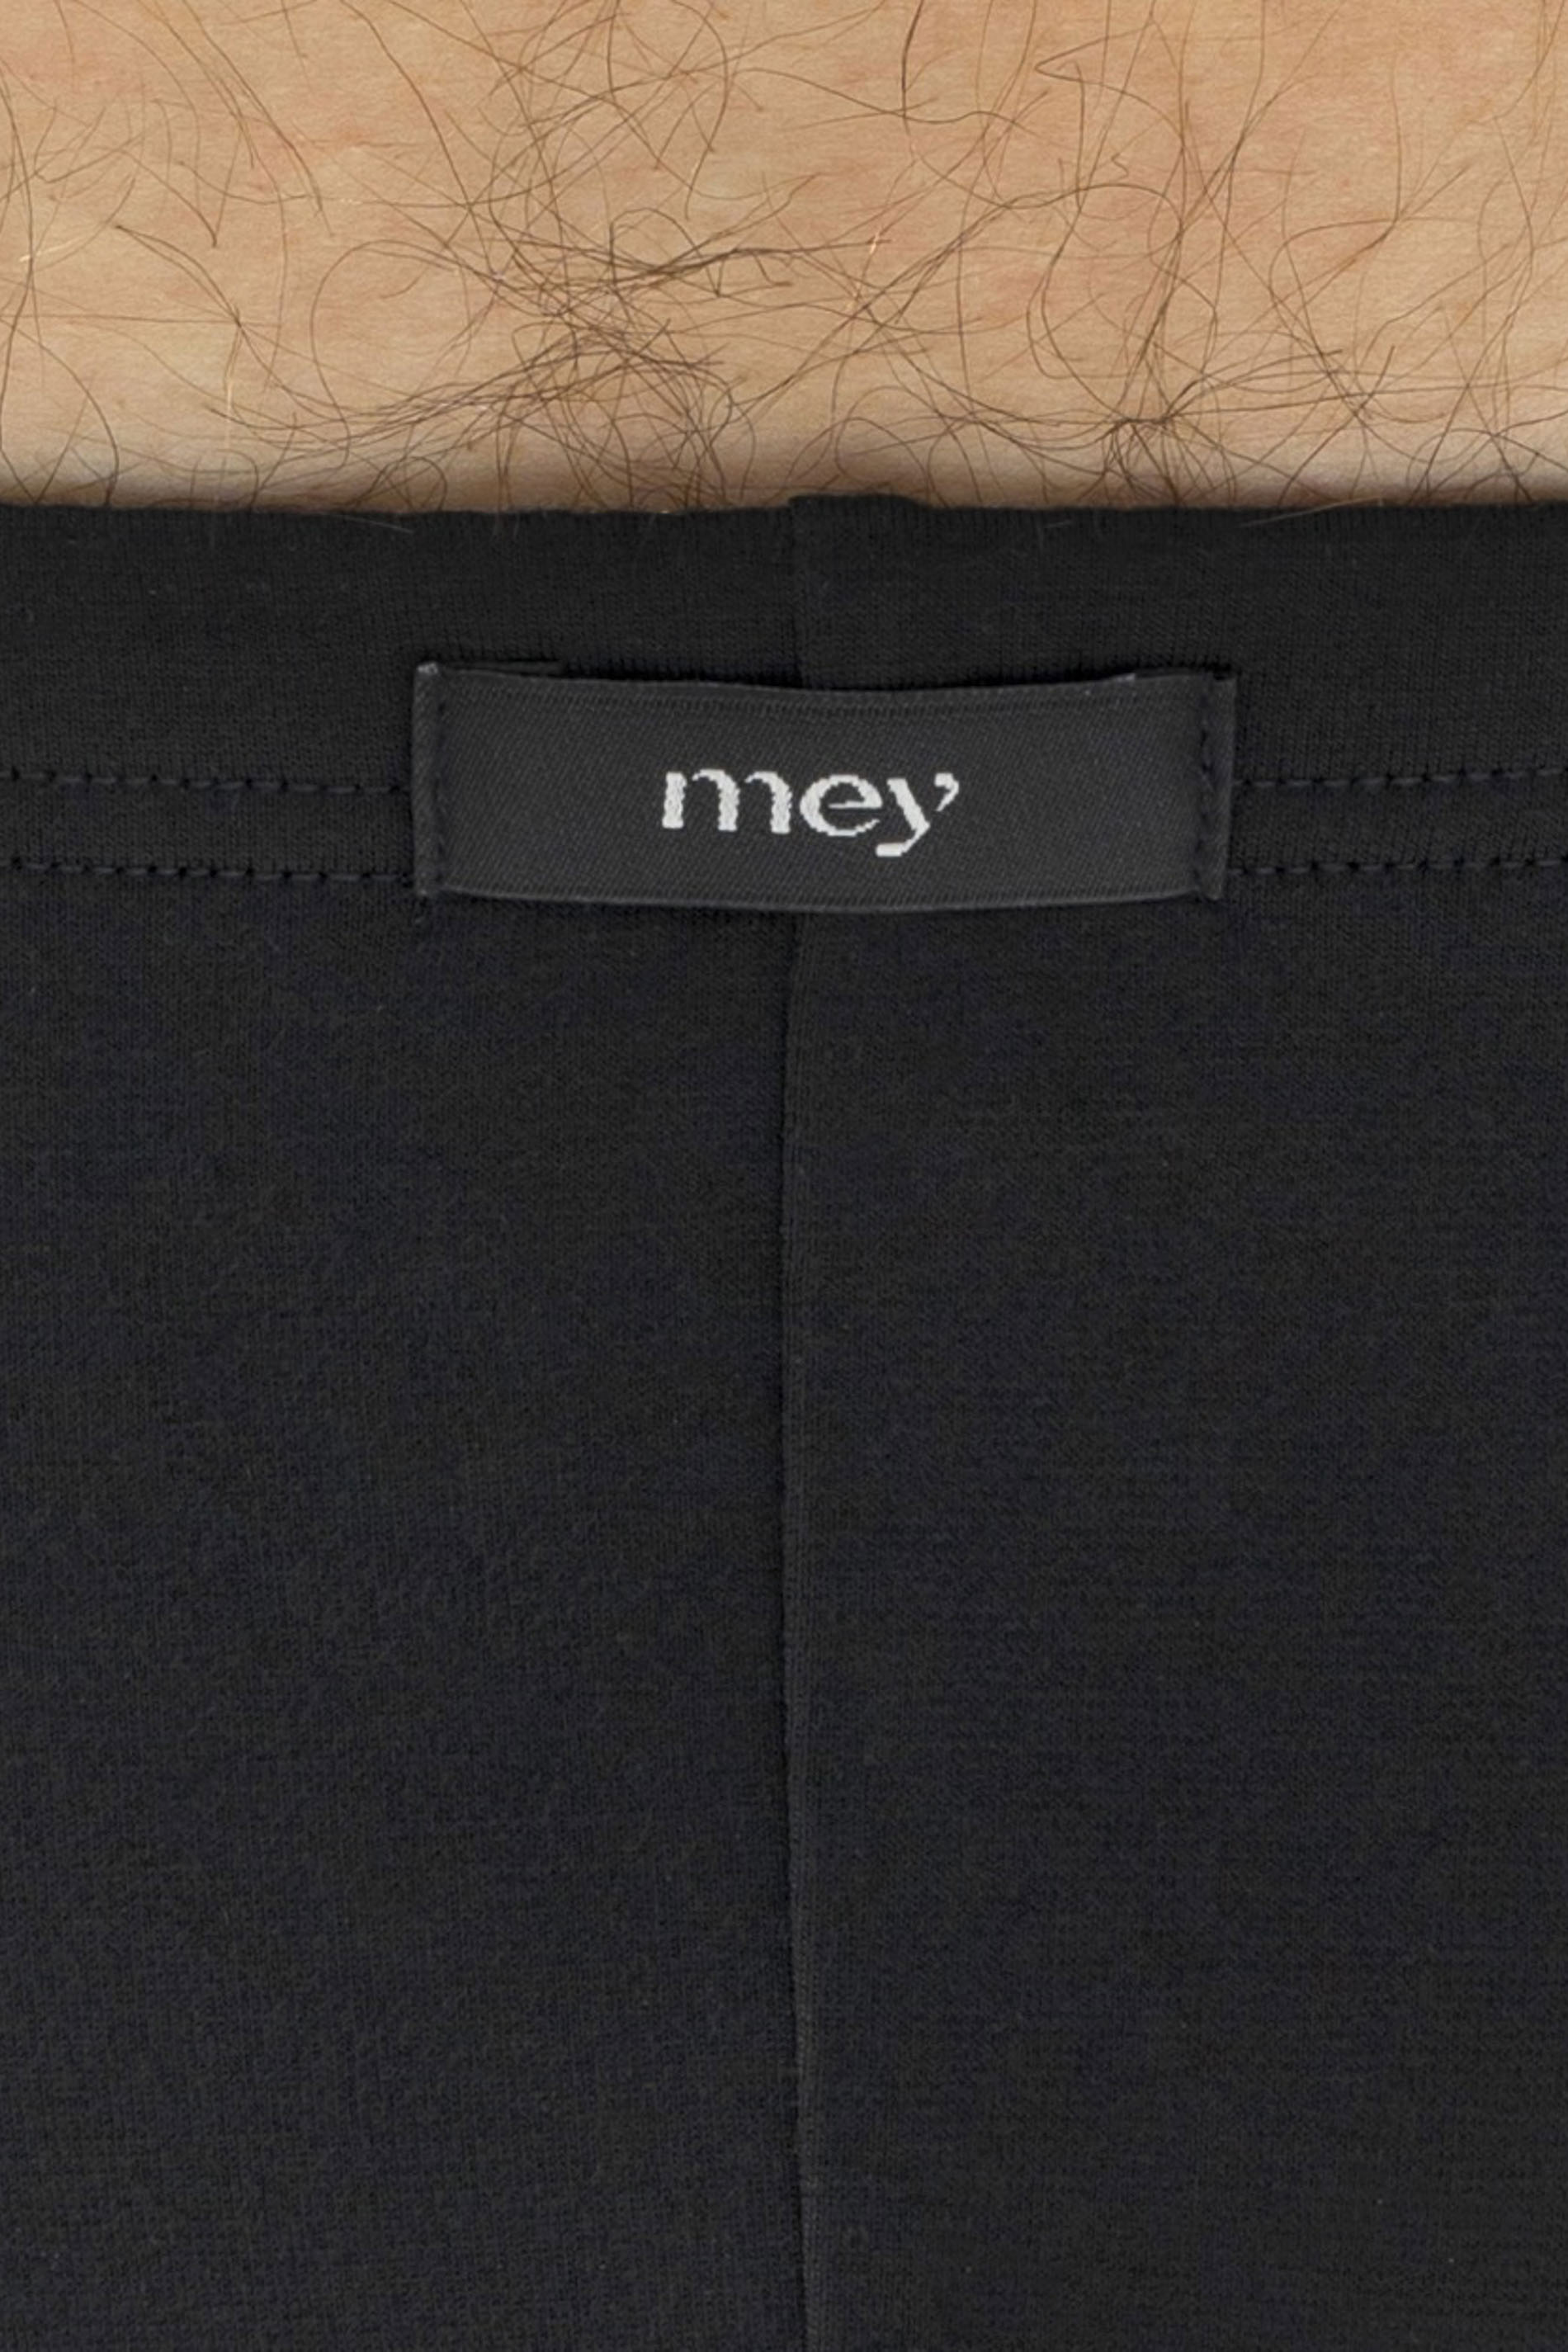 Shorty Black Serie Network Detail View 01 | mey®